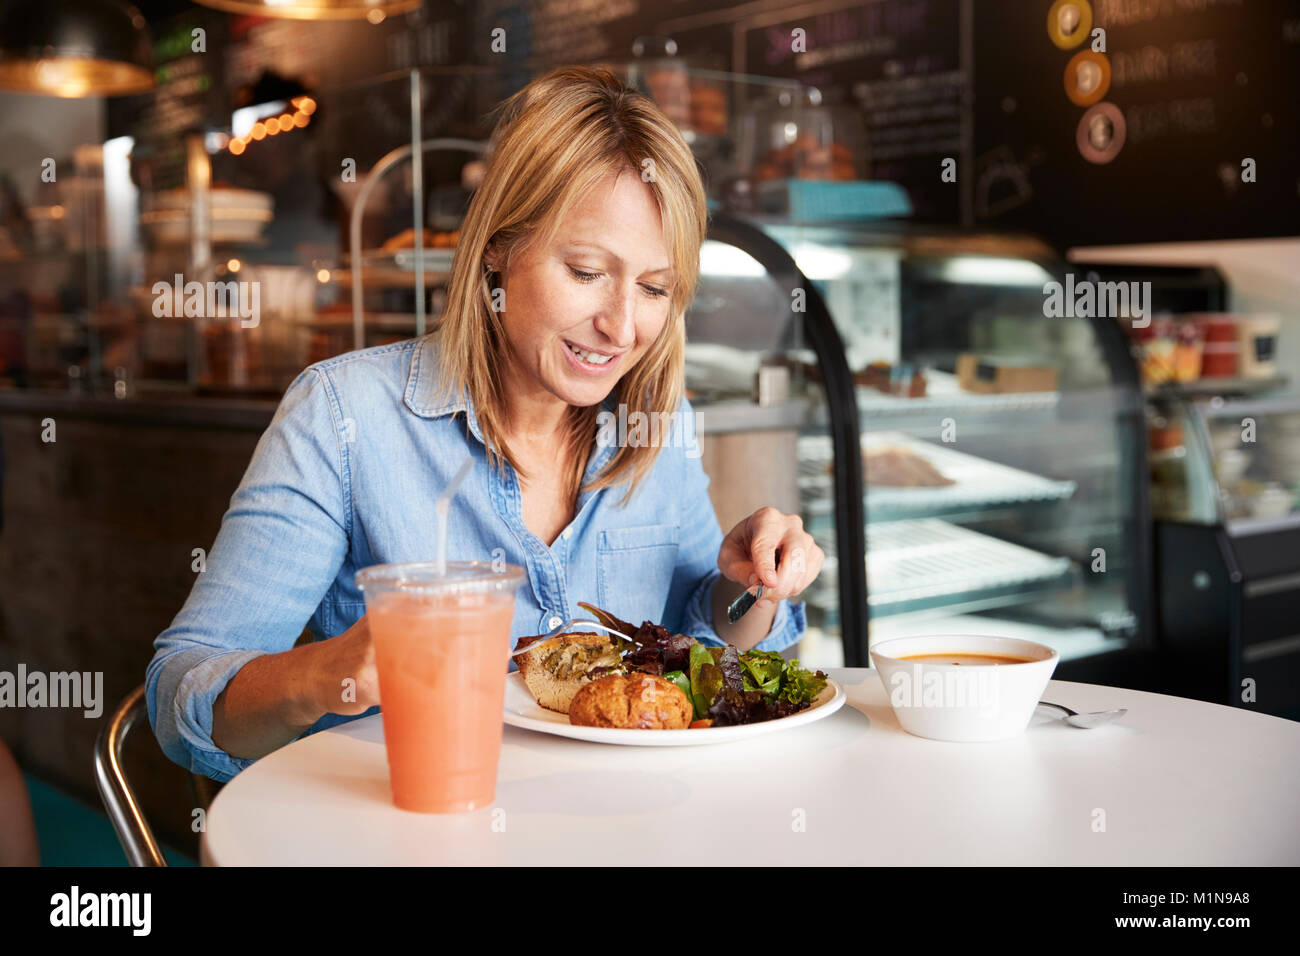 Woman In Coffee Shop Sitting At Table Eating Healthy Lunch Stock Photo